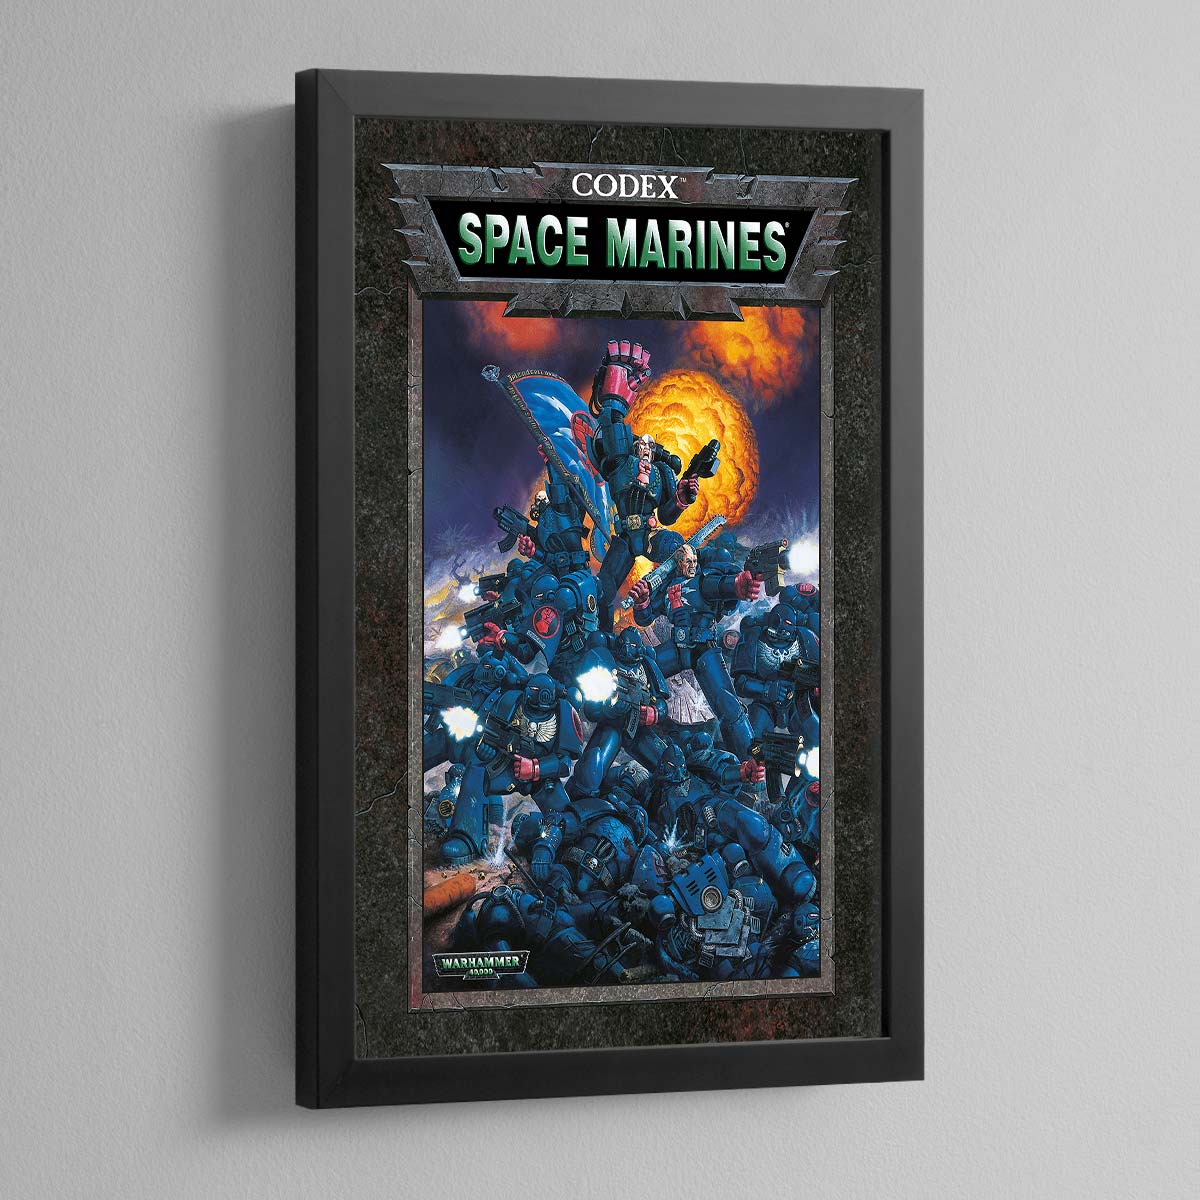 Warhammer 40,000 3rd Edition – Space Marines – Frame